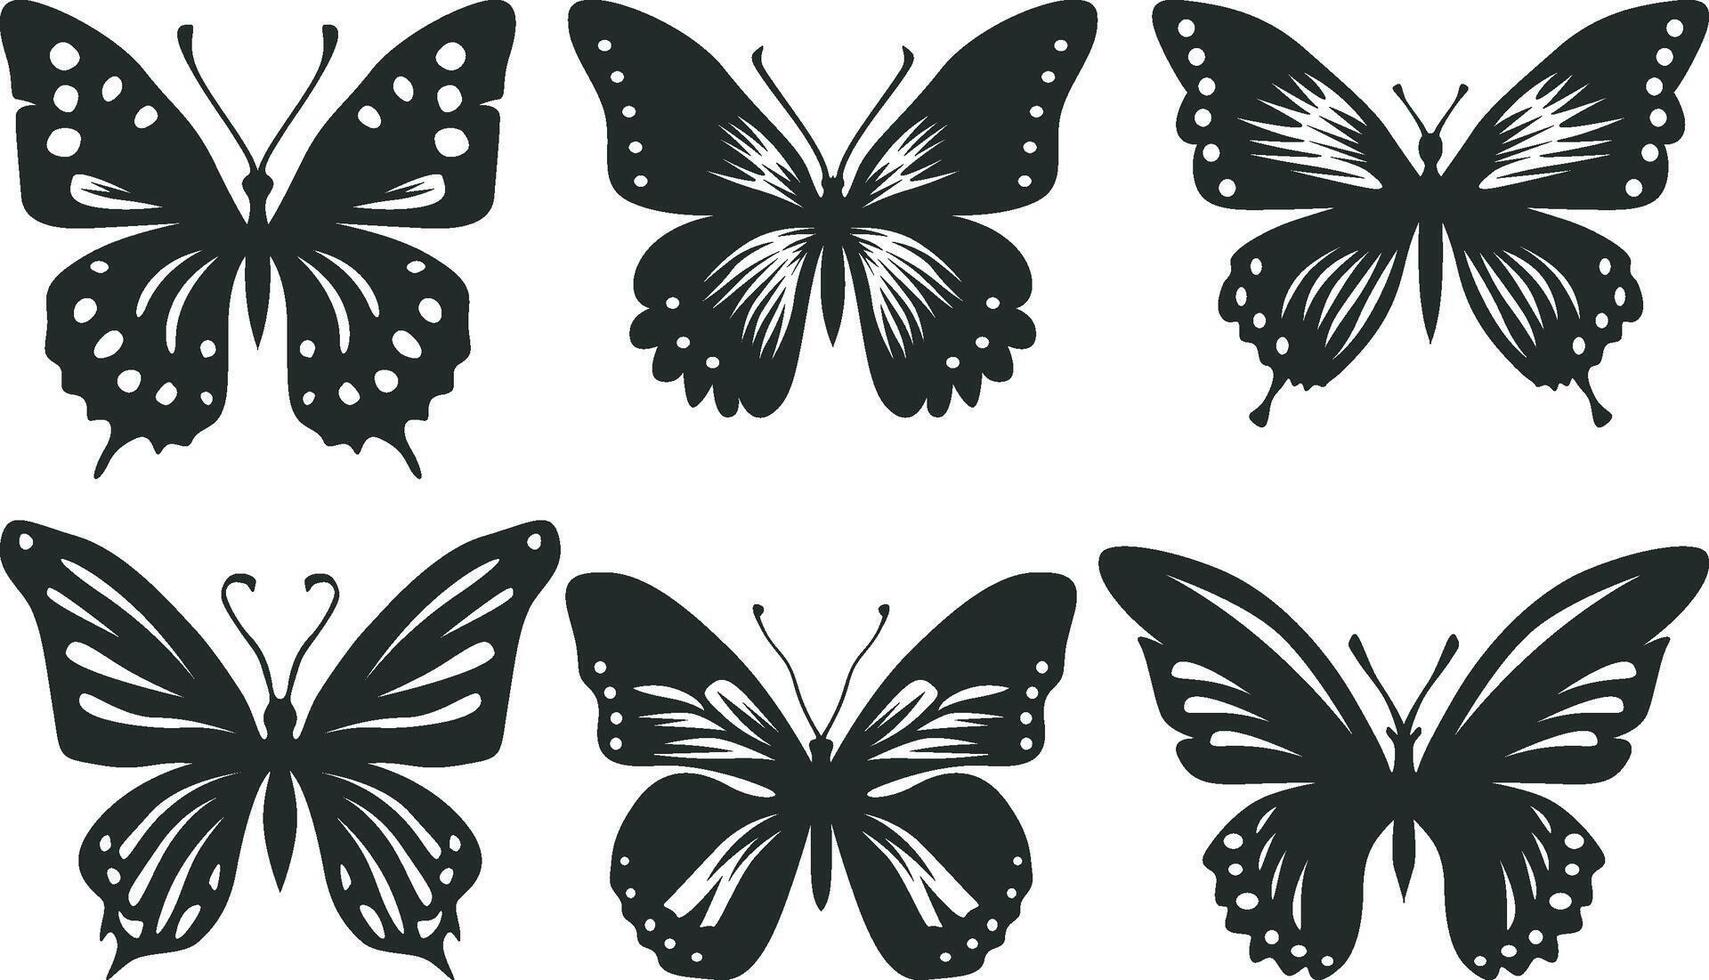 Butterfly silhouettes Bundle collection, Black Butterfly set vector